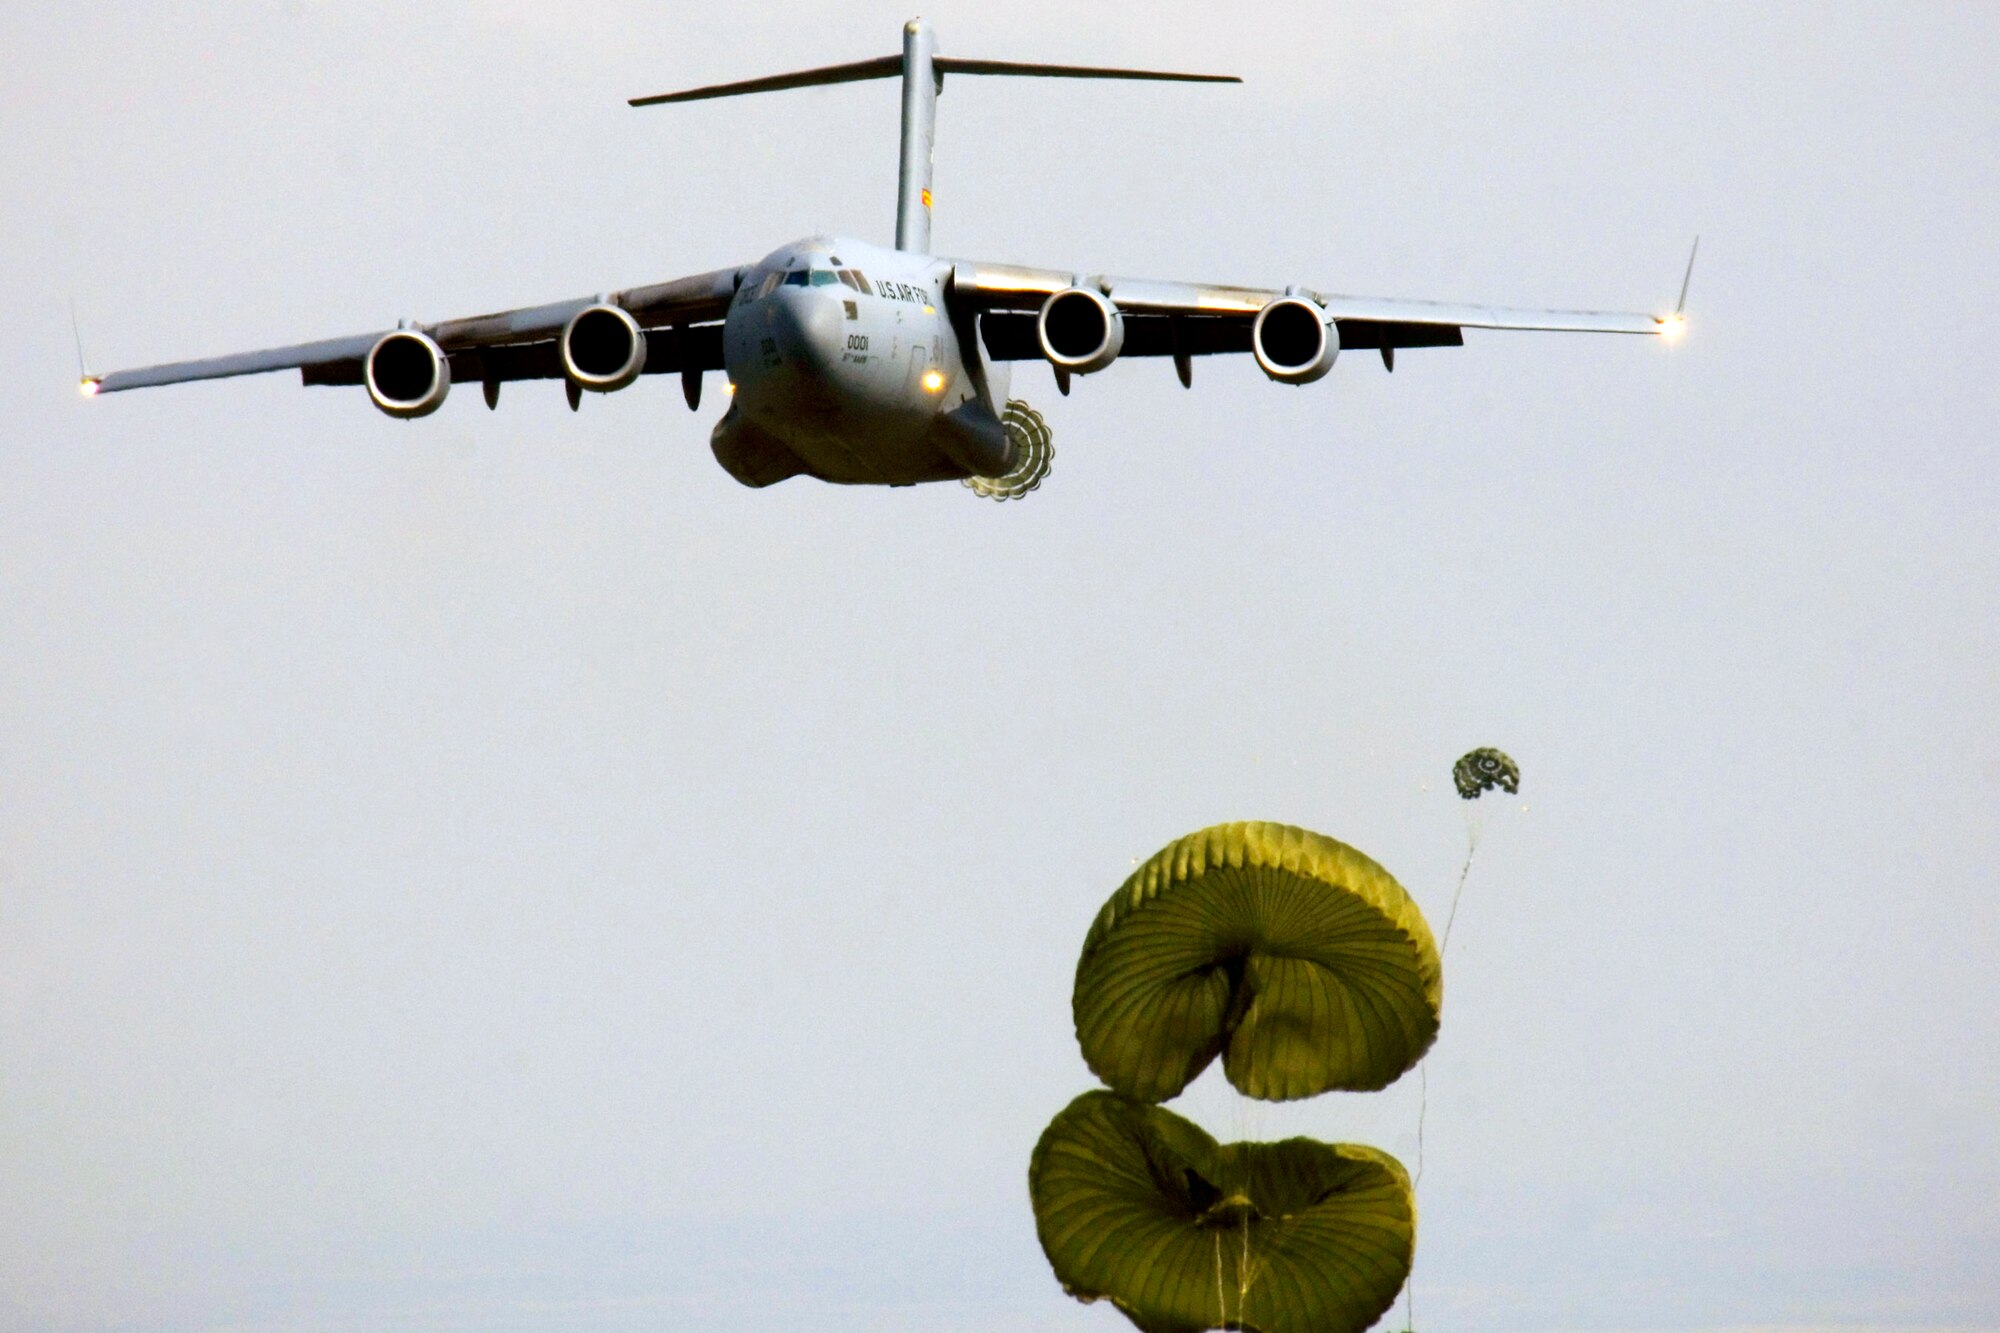 A C-17 Globemaster III drops a cargo load during a recent training mission at Altus Air Force Base, Okla. Student loadmasters log 25 to 30 hours of flight training time in C-17s from the 58th Airlift Squadron. (U.S. Air Force photo/Tech. Sgt. Matt Hannen)